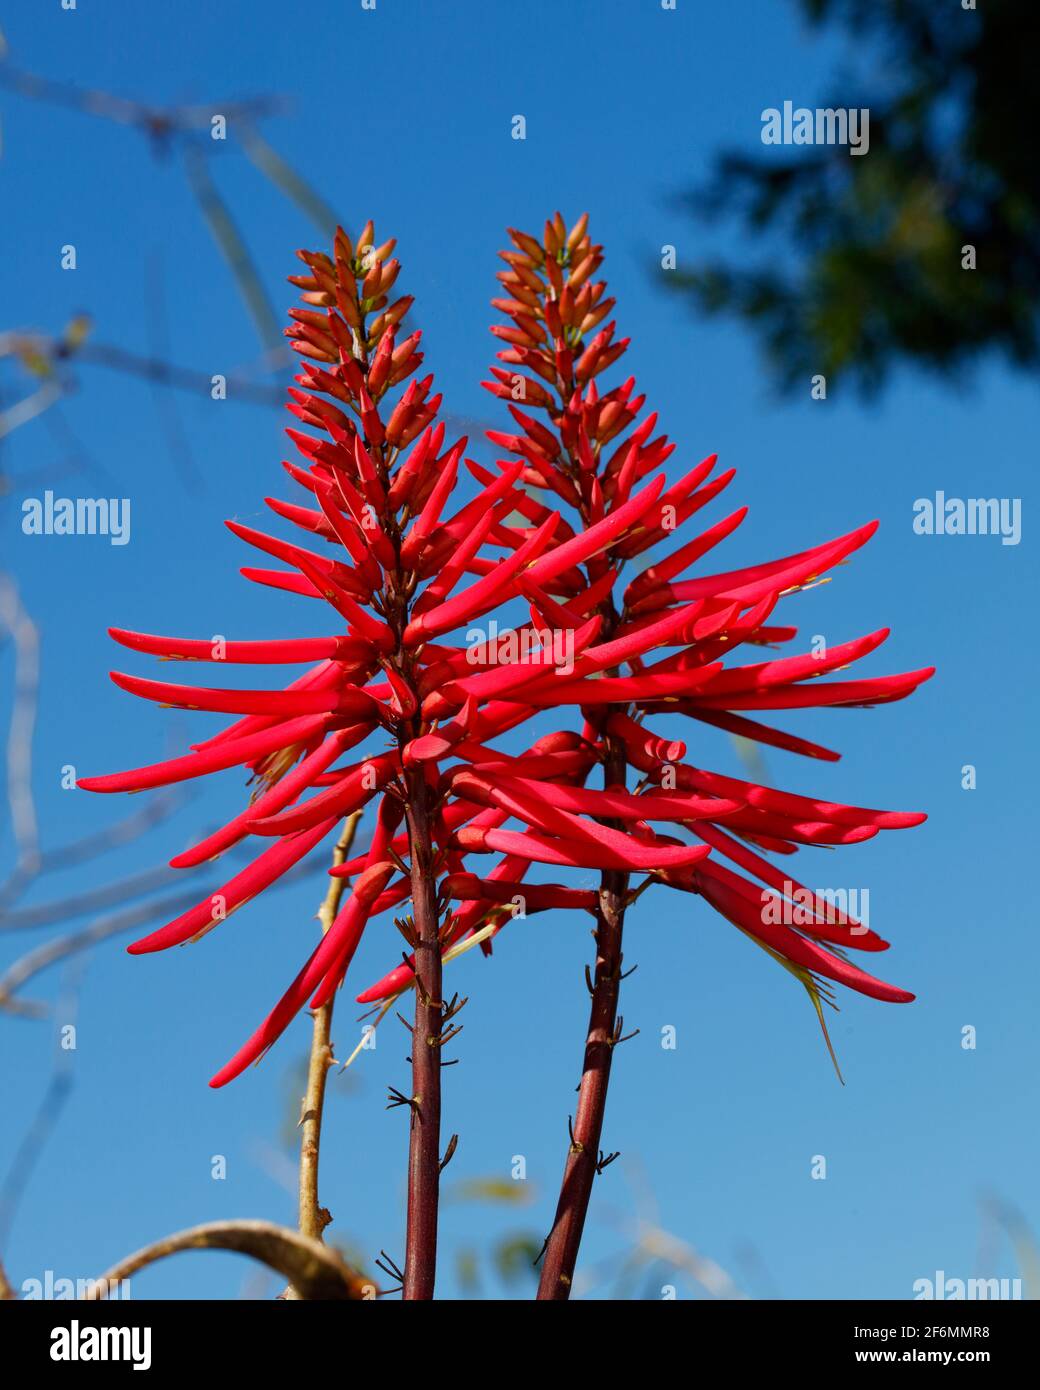 A Coral bean, Erythrina herbacea, in full bloom. Stock Photo